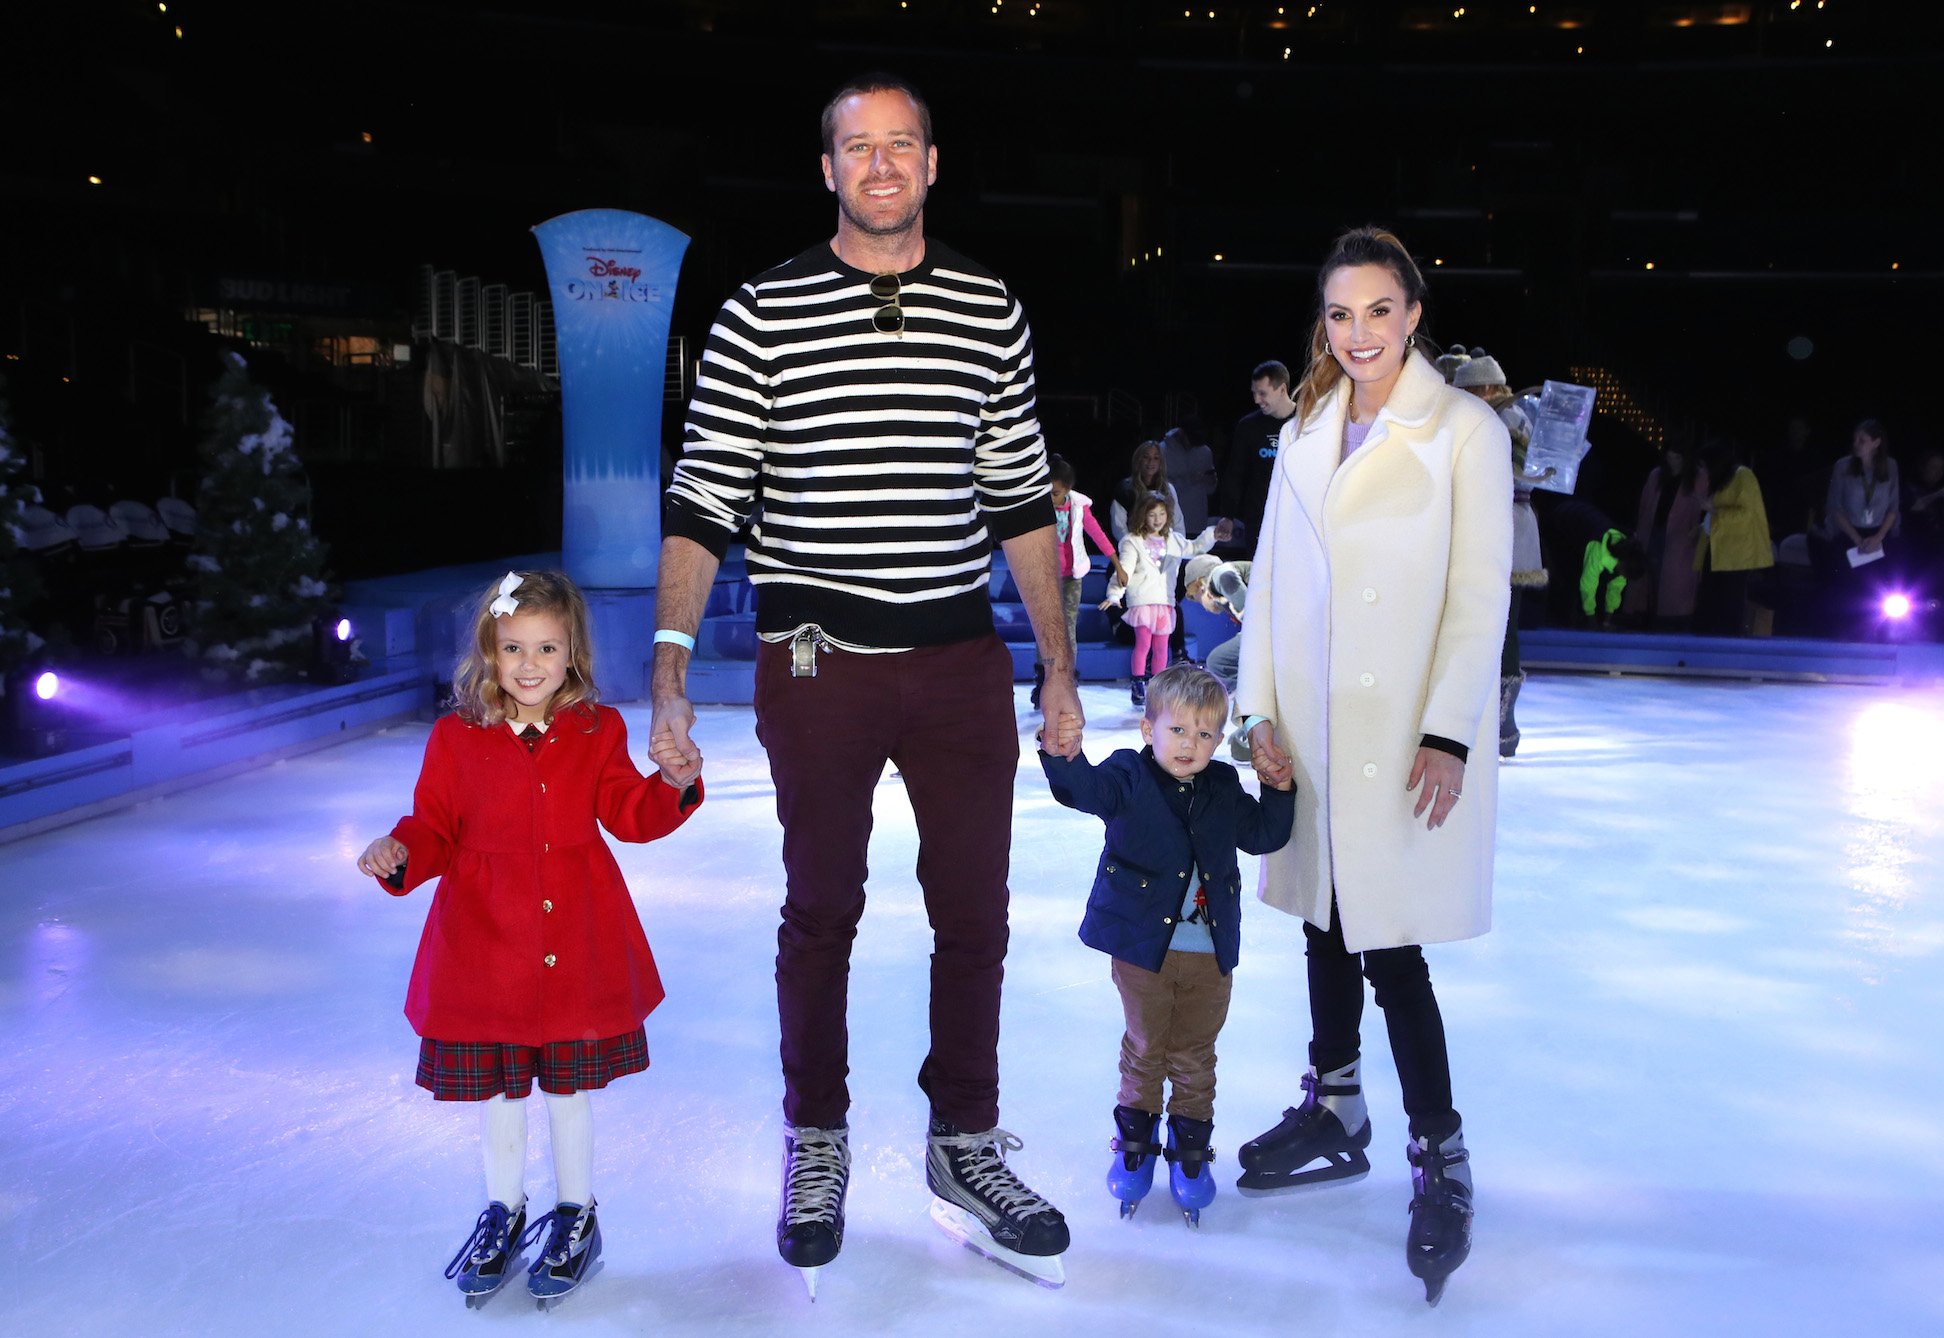 Armie Hammer and Elizabeth Chambers with children Harper and Ford ice skating. Armie Hammer's age is 33, Elizabeth Chambers is 37, Harper is 5, and Ford is almost 3